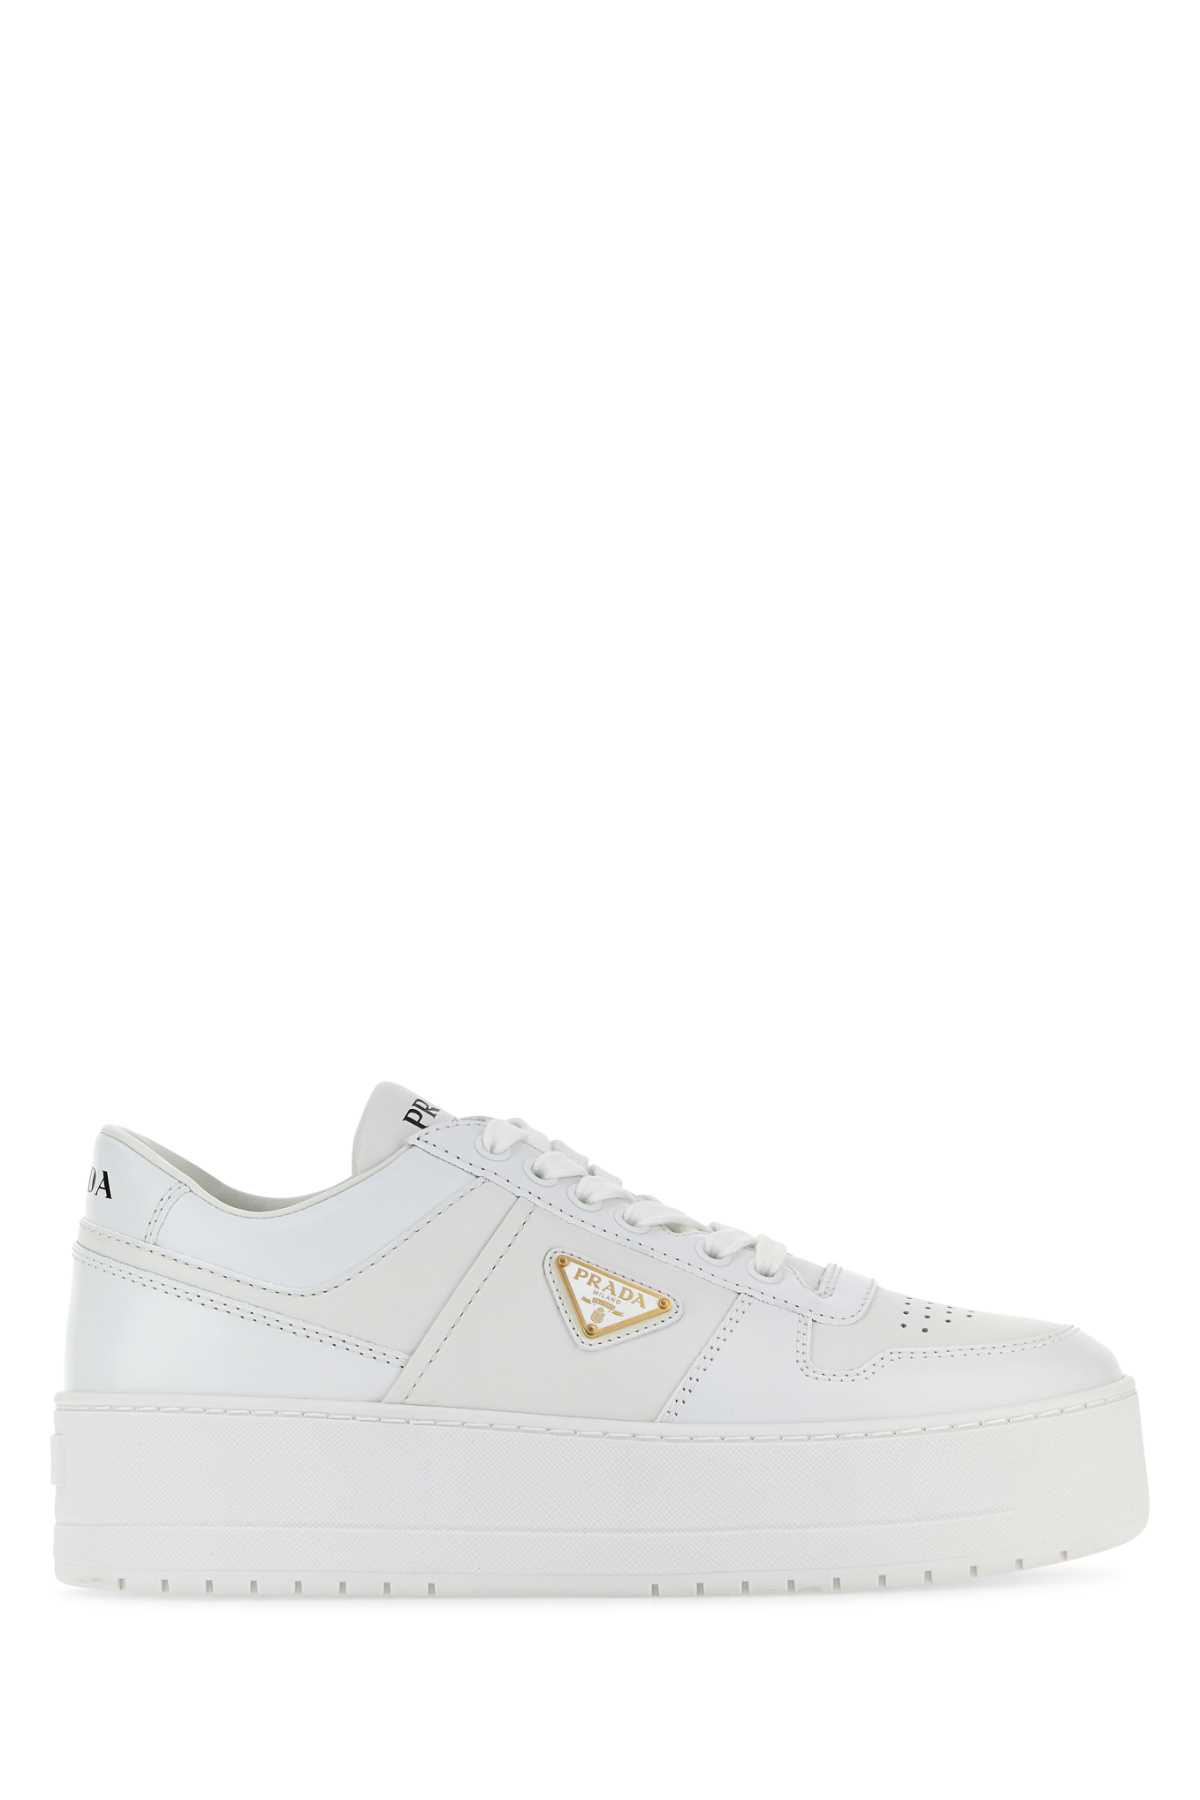 Shop Prada White Leather Downtown Sneakers In Bianco